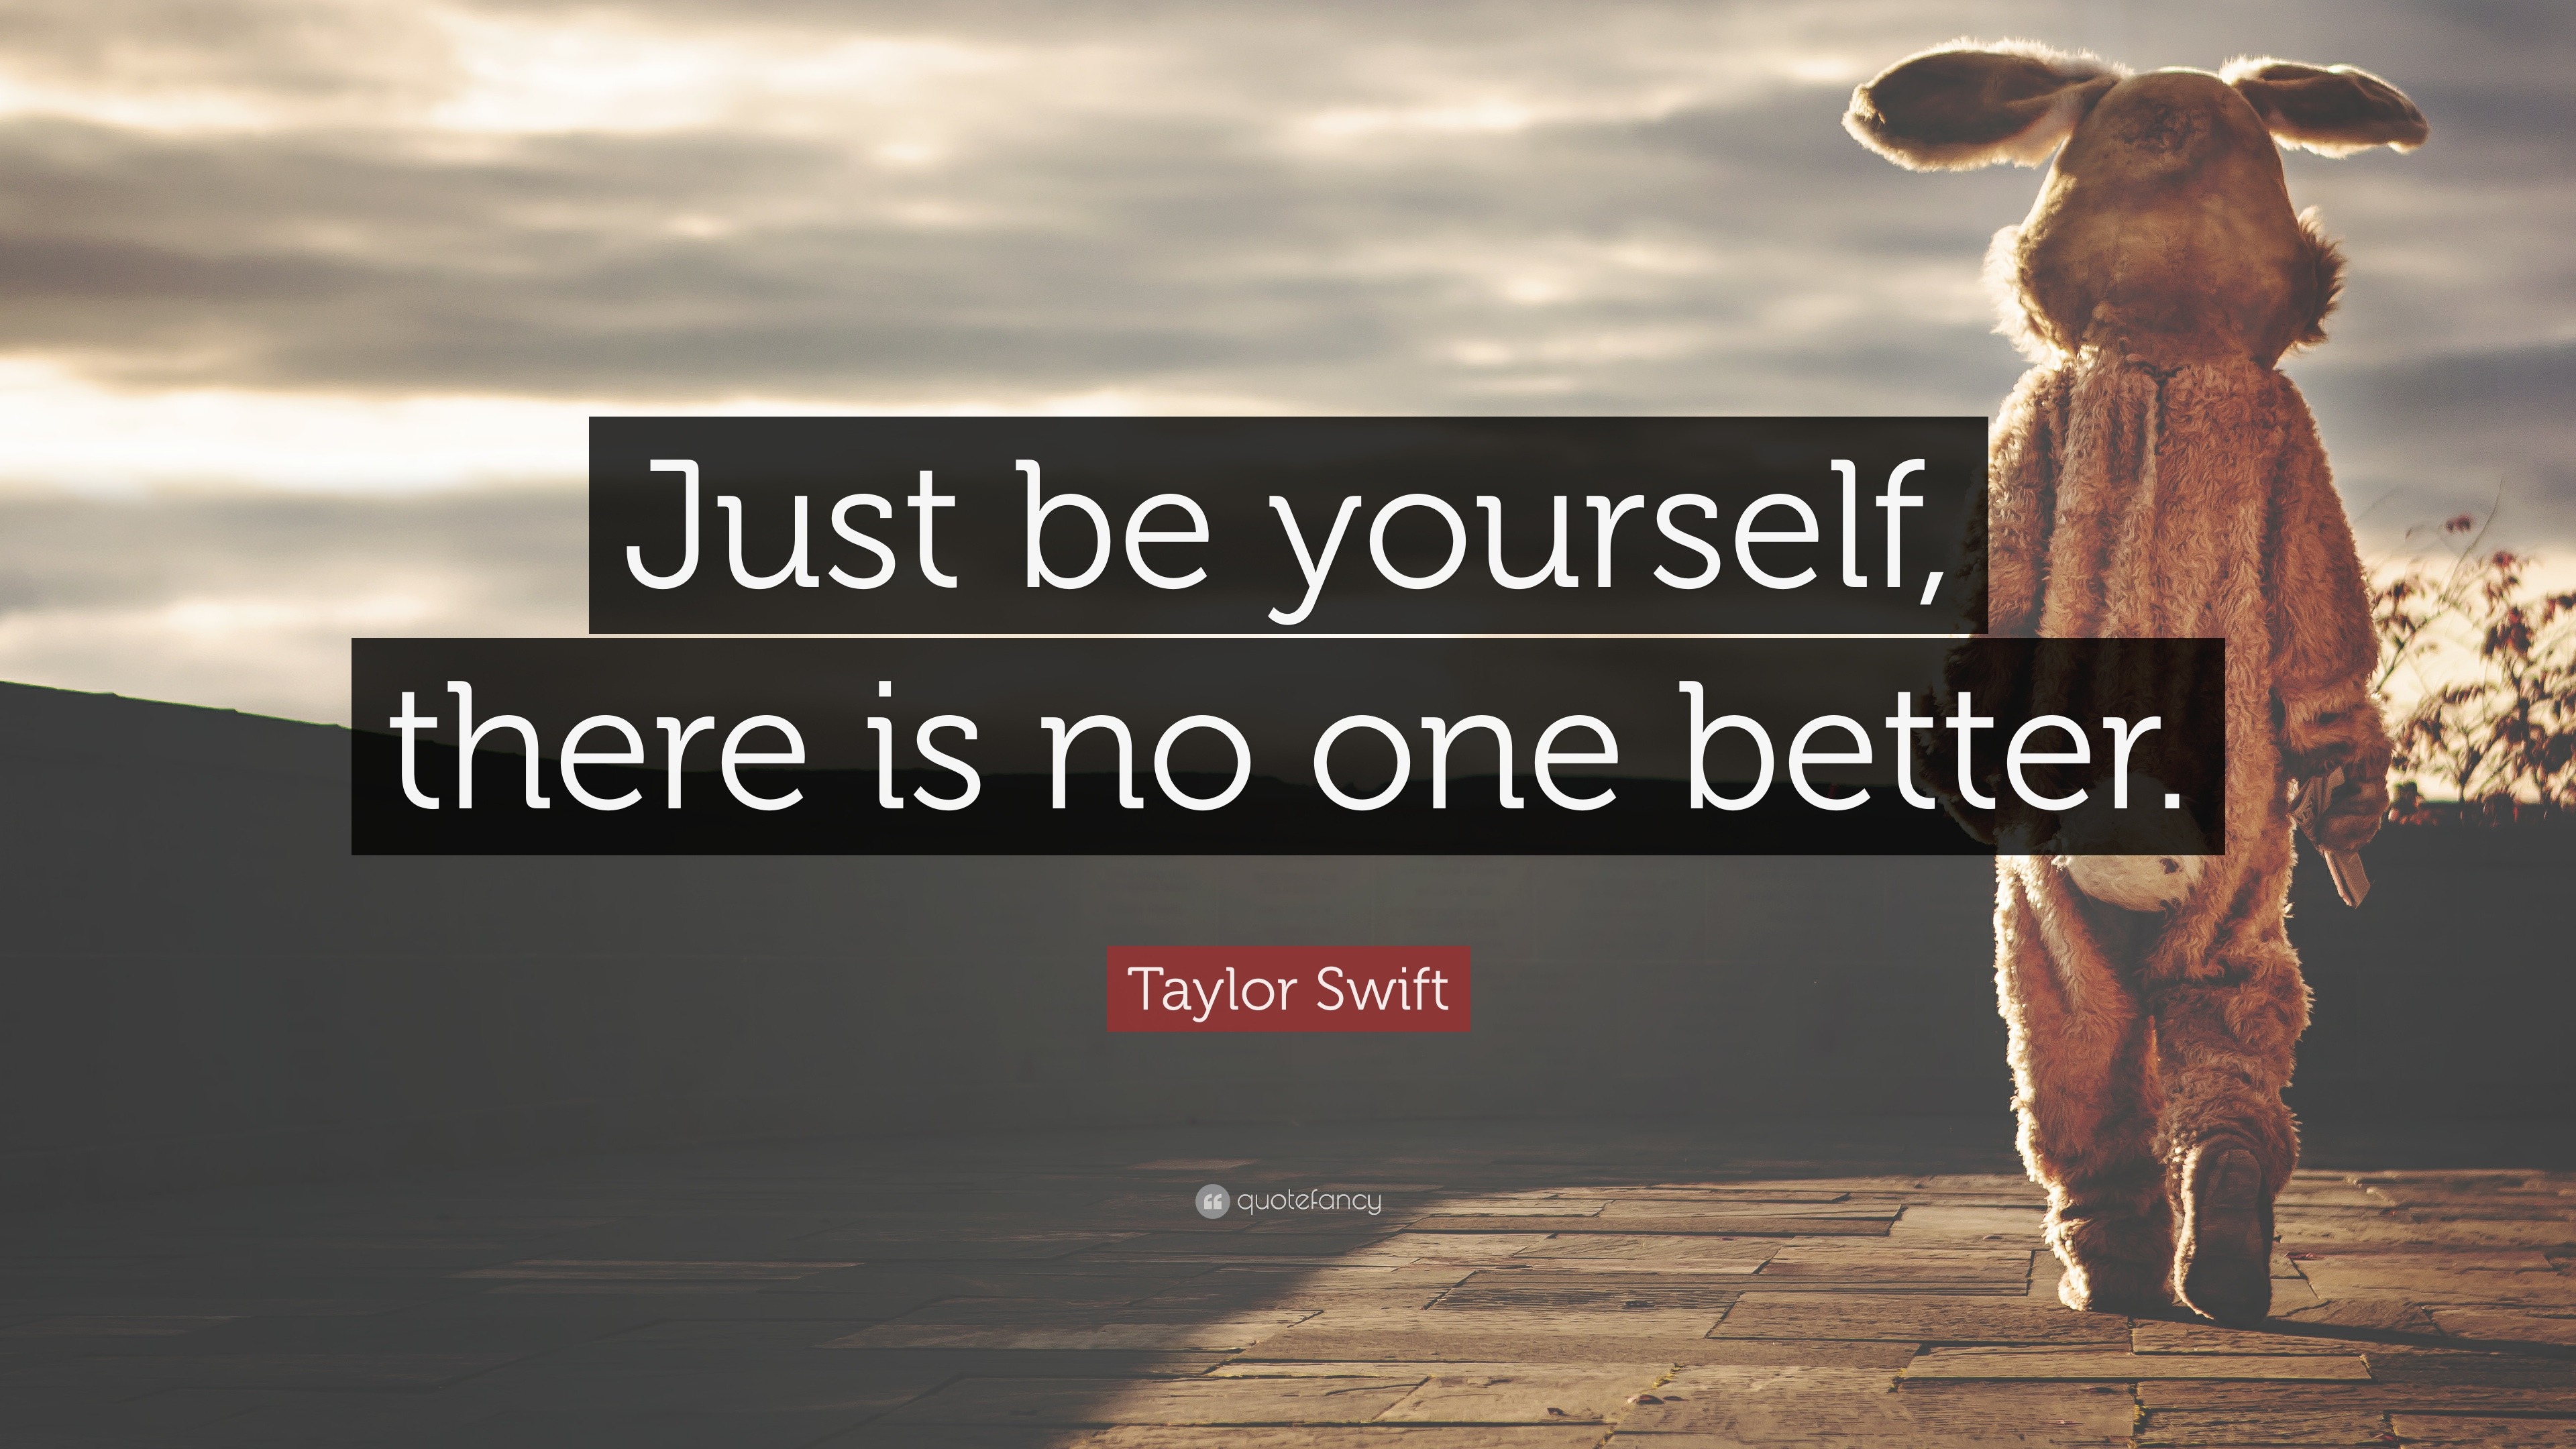 Taylor Swift Quote: “Just be yourself, there is no one better.”